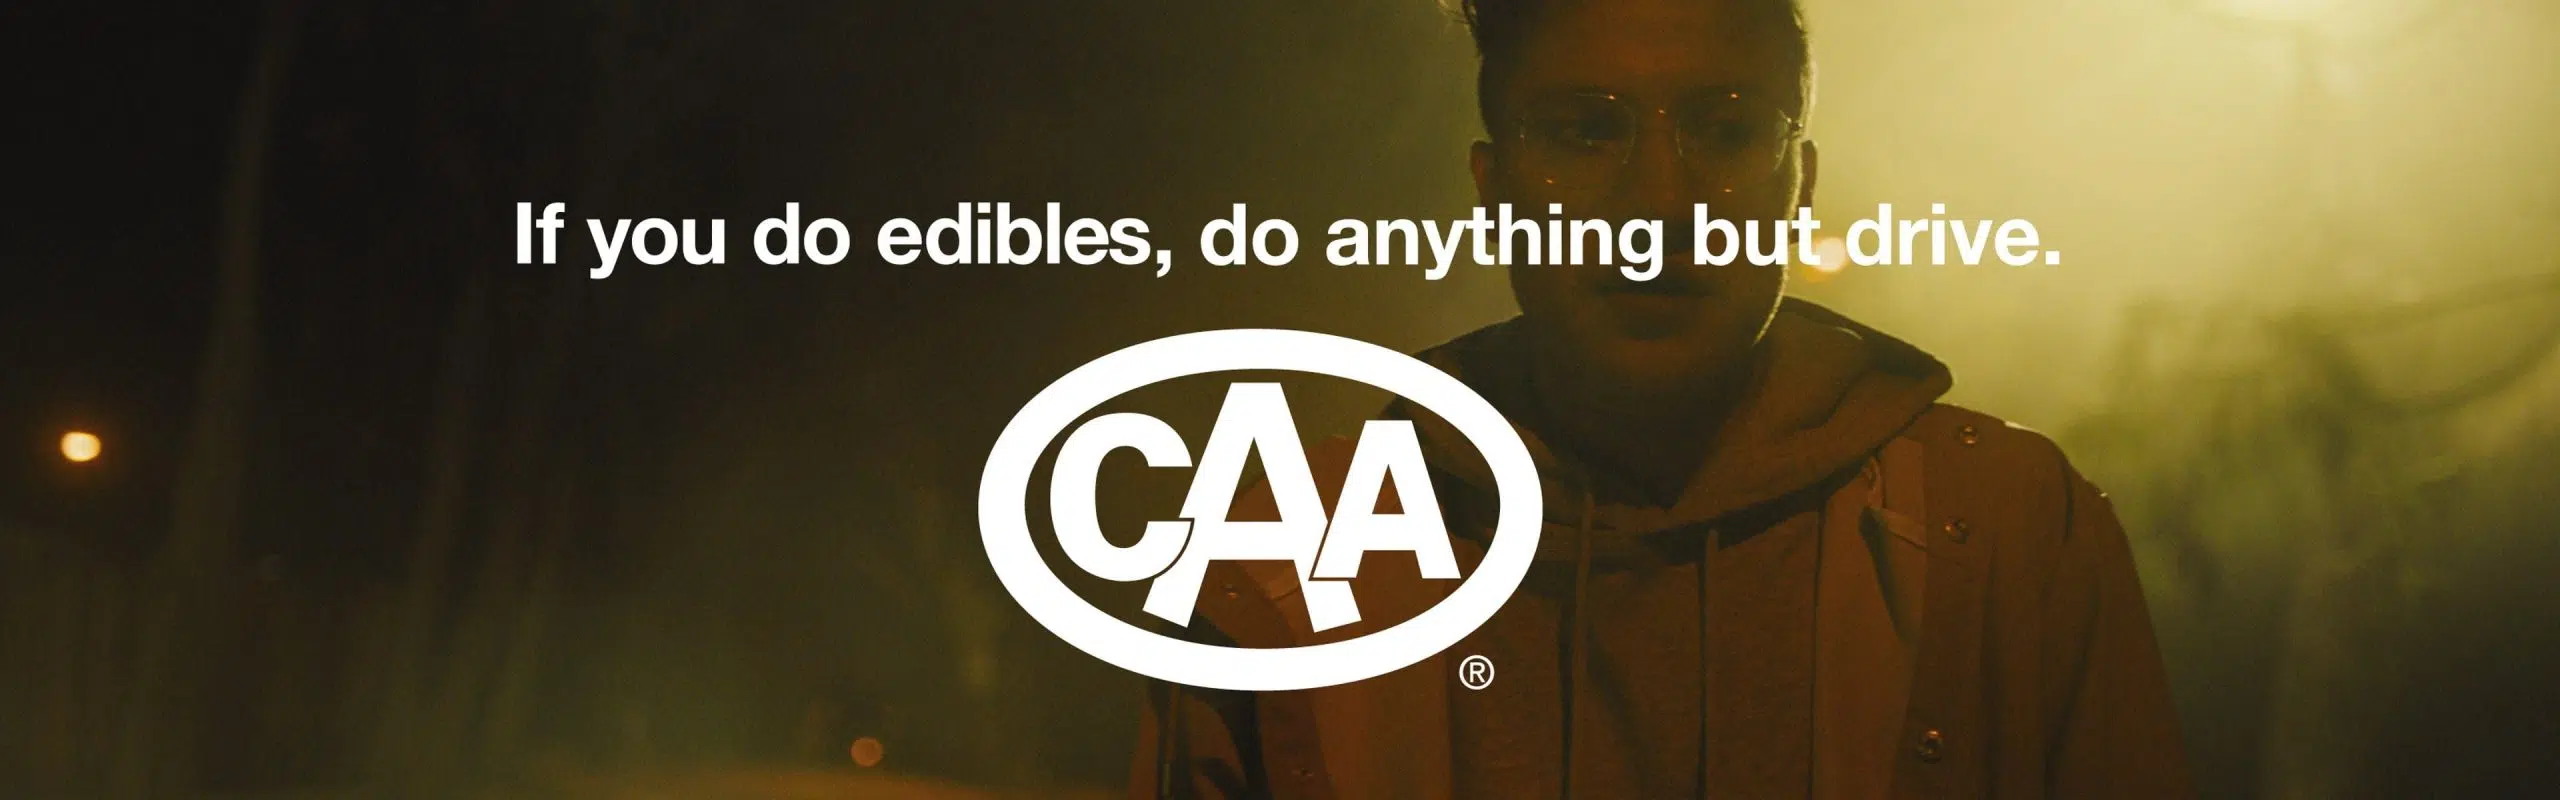 'Do Anything But Drive' CAA Campaign Warns Of Cannabis Consumption